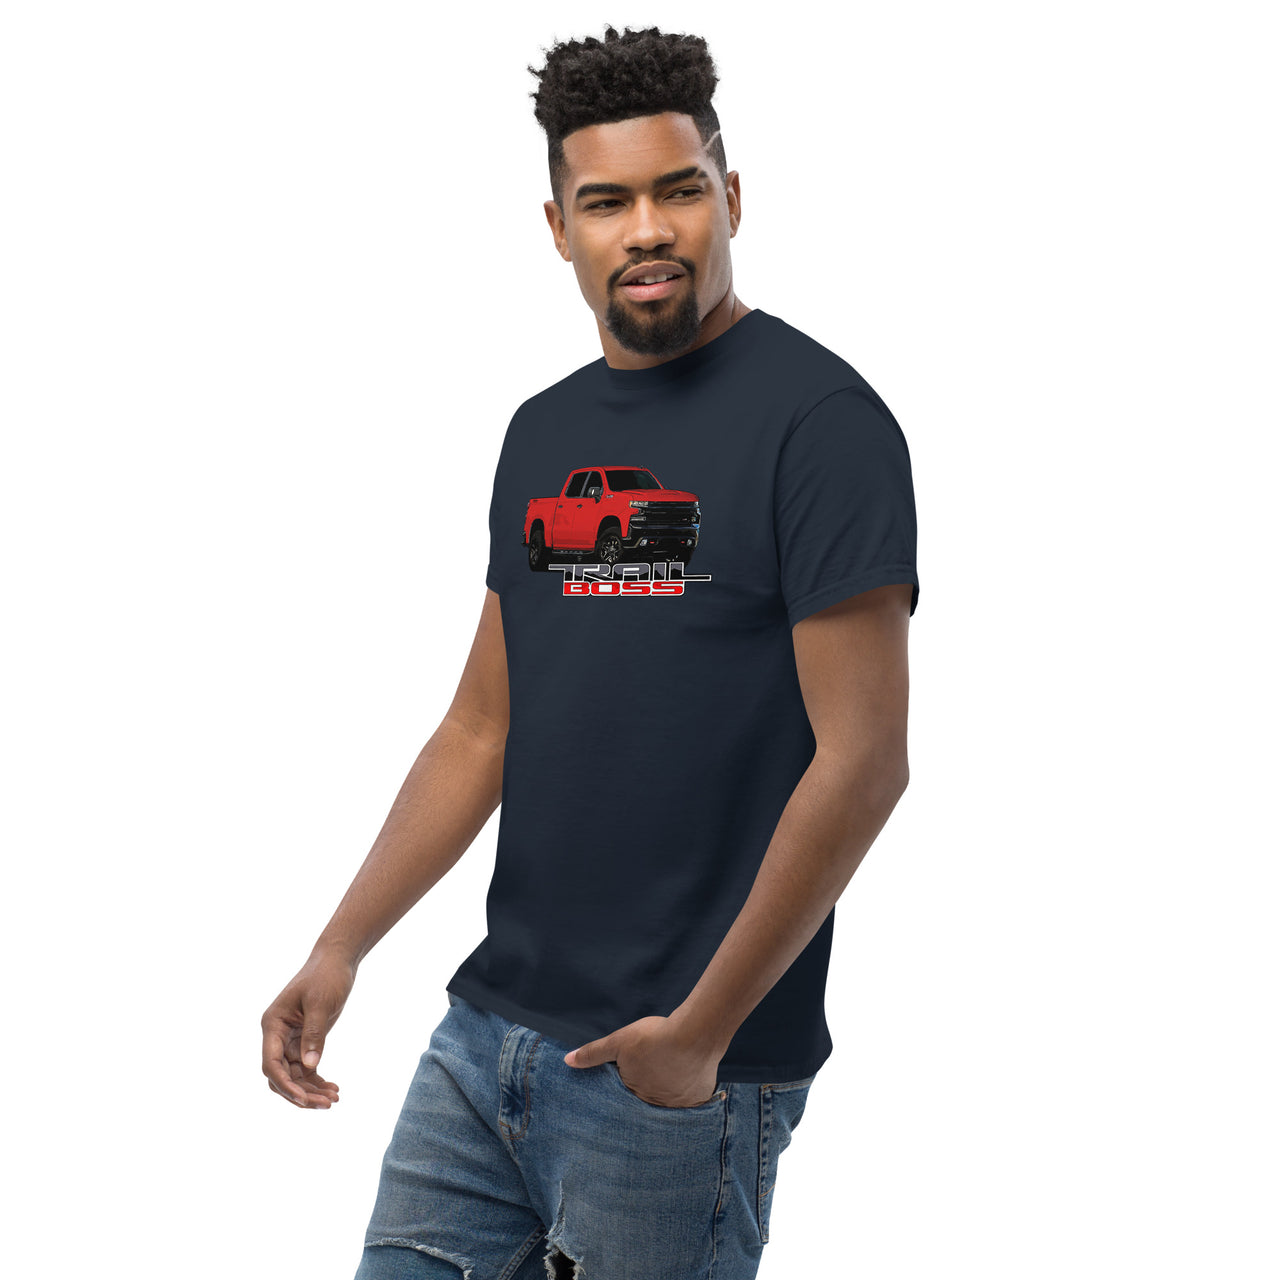 Red Trail Boss Truck T-Shirt modeled in navy